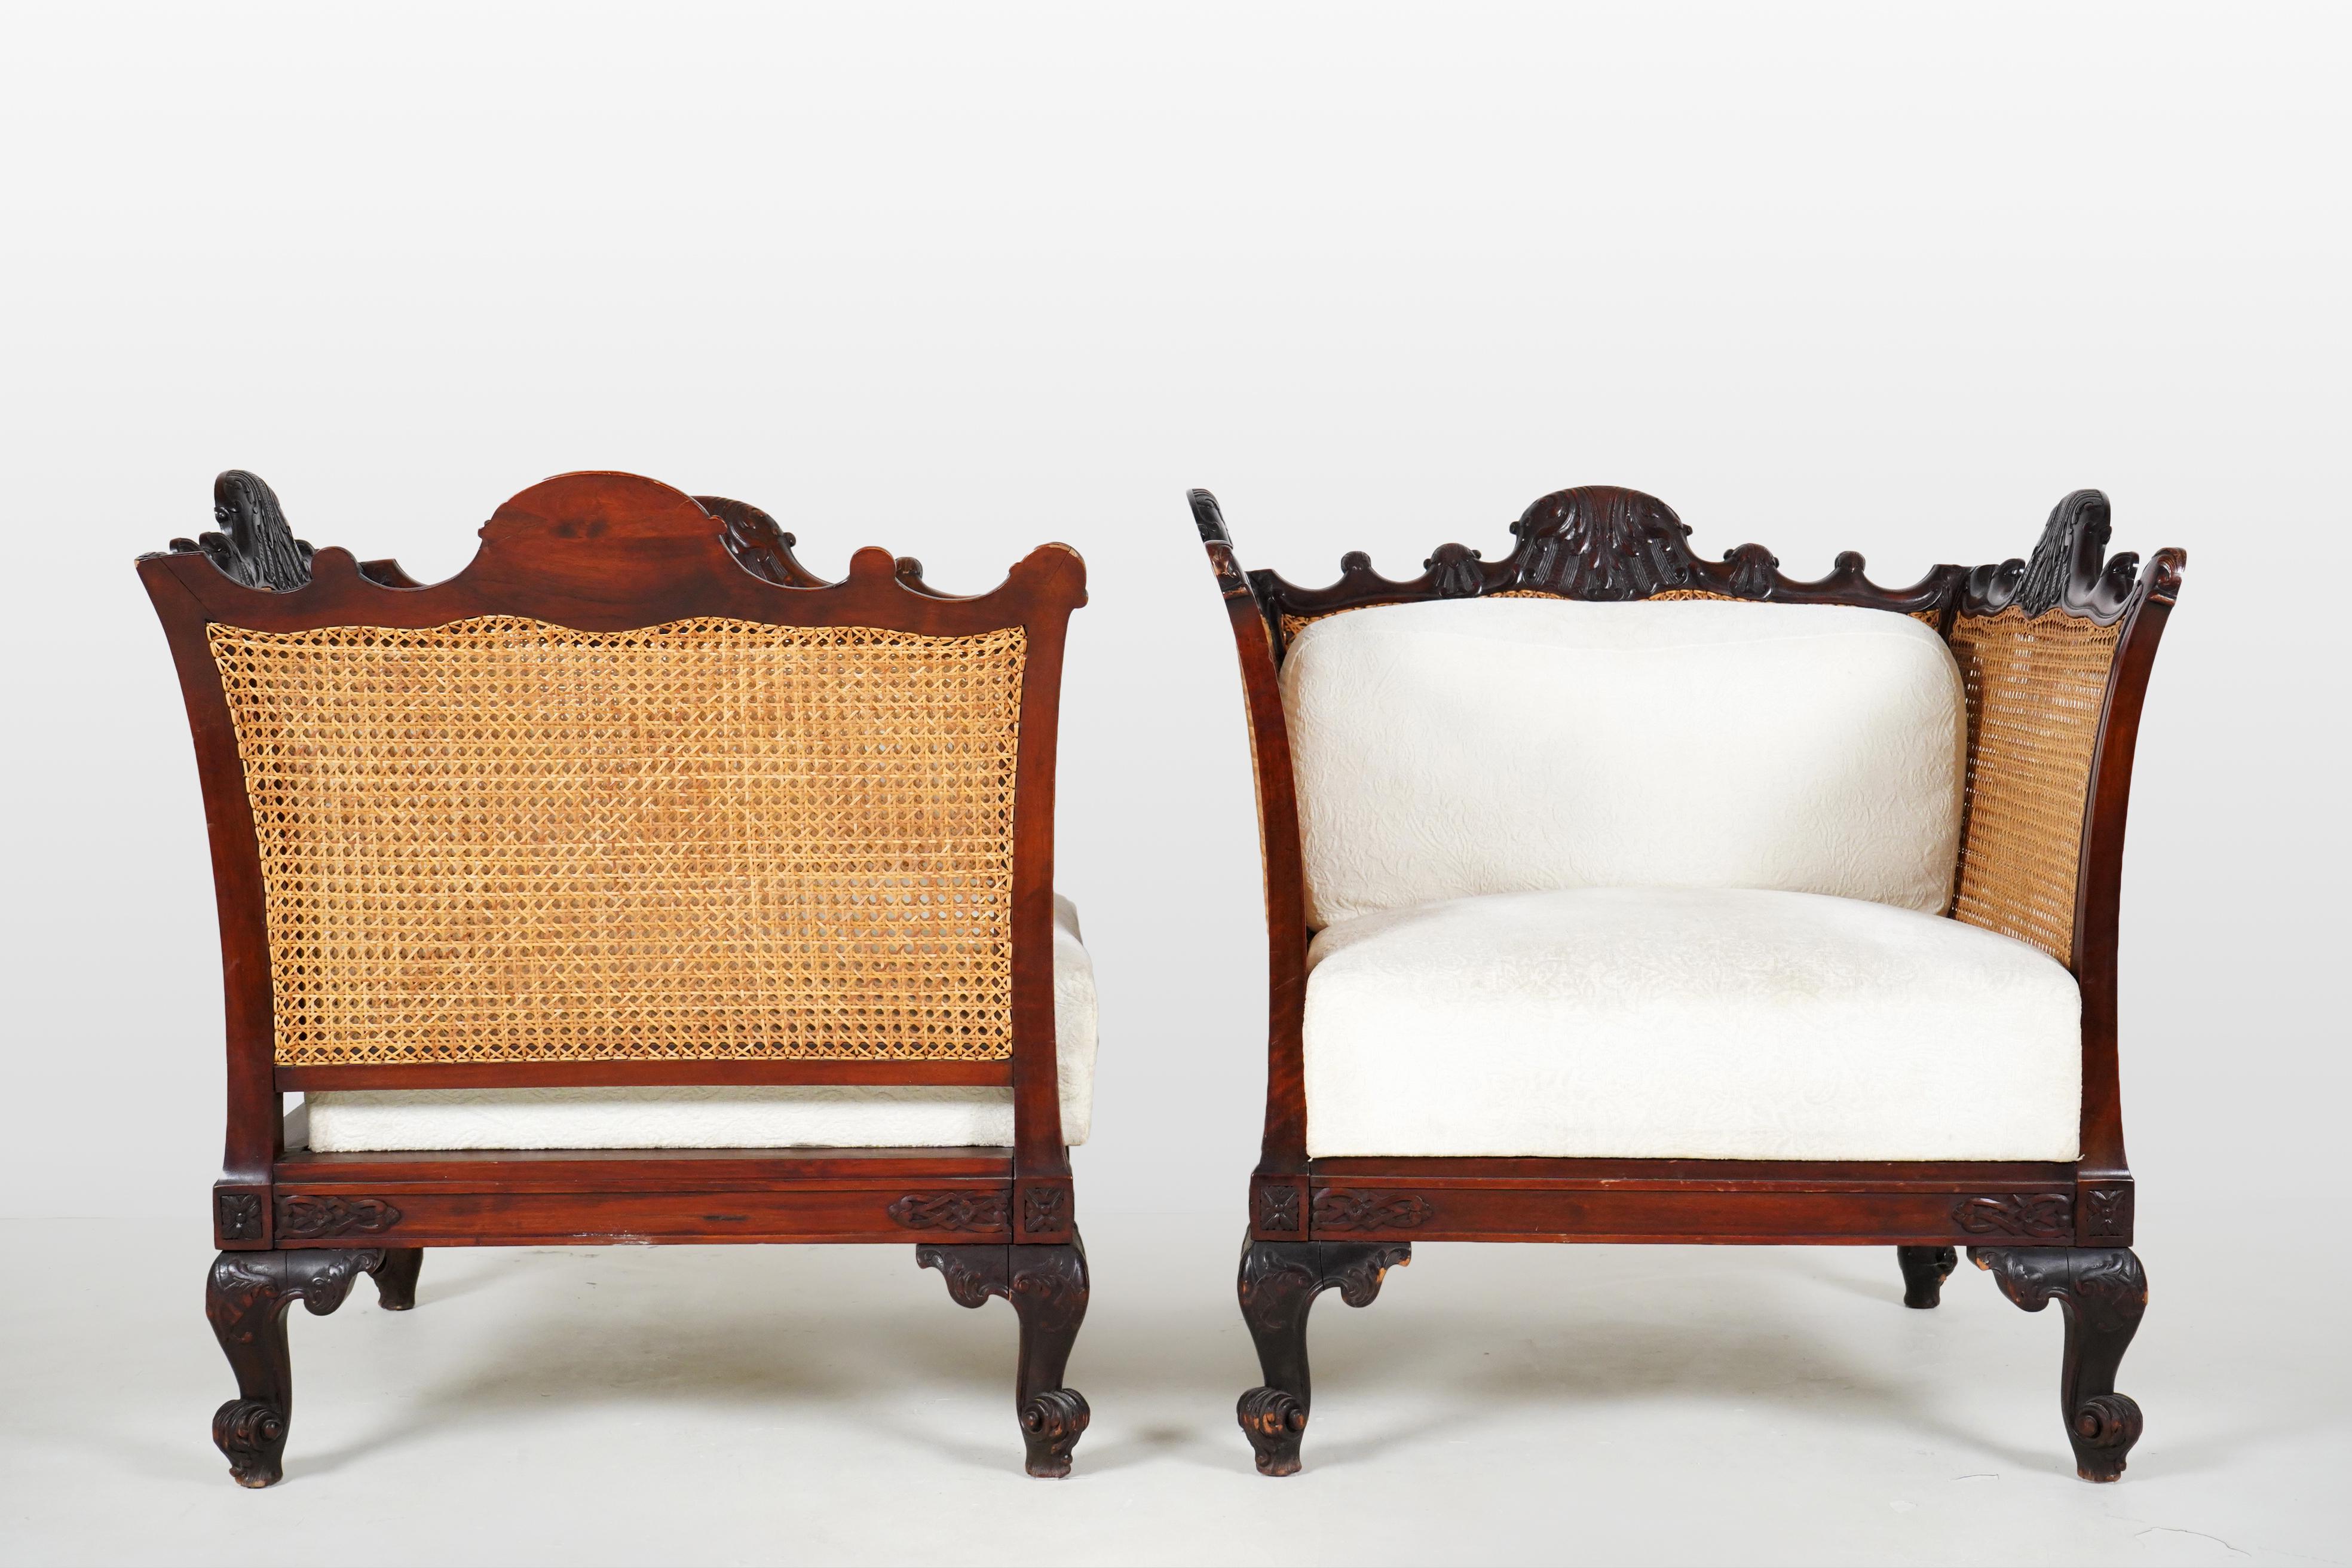 This impressive pair of vintage cane-backed armchairs can add richness and history to modern spaces. The chairs are unusually deep and wide 34